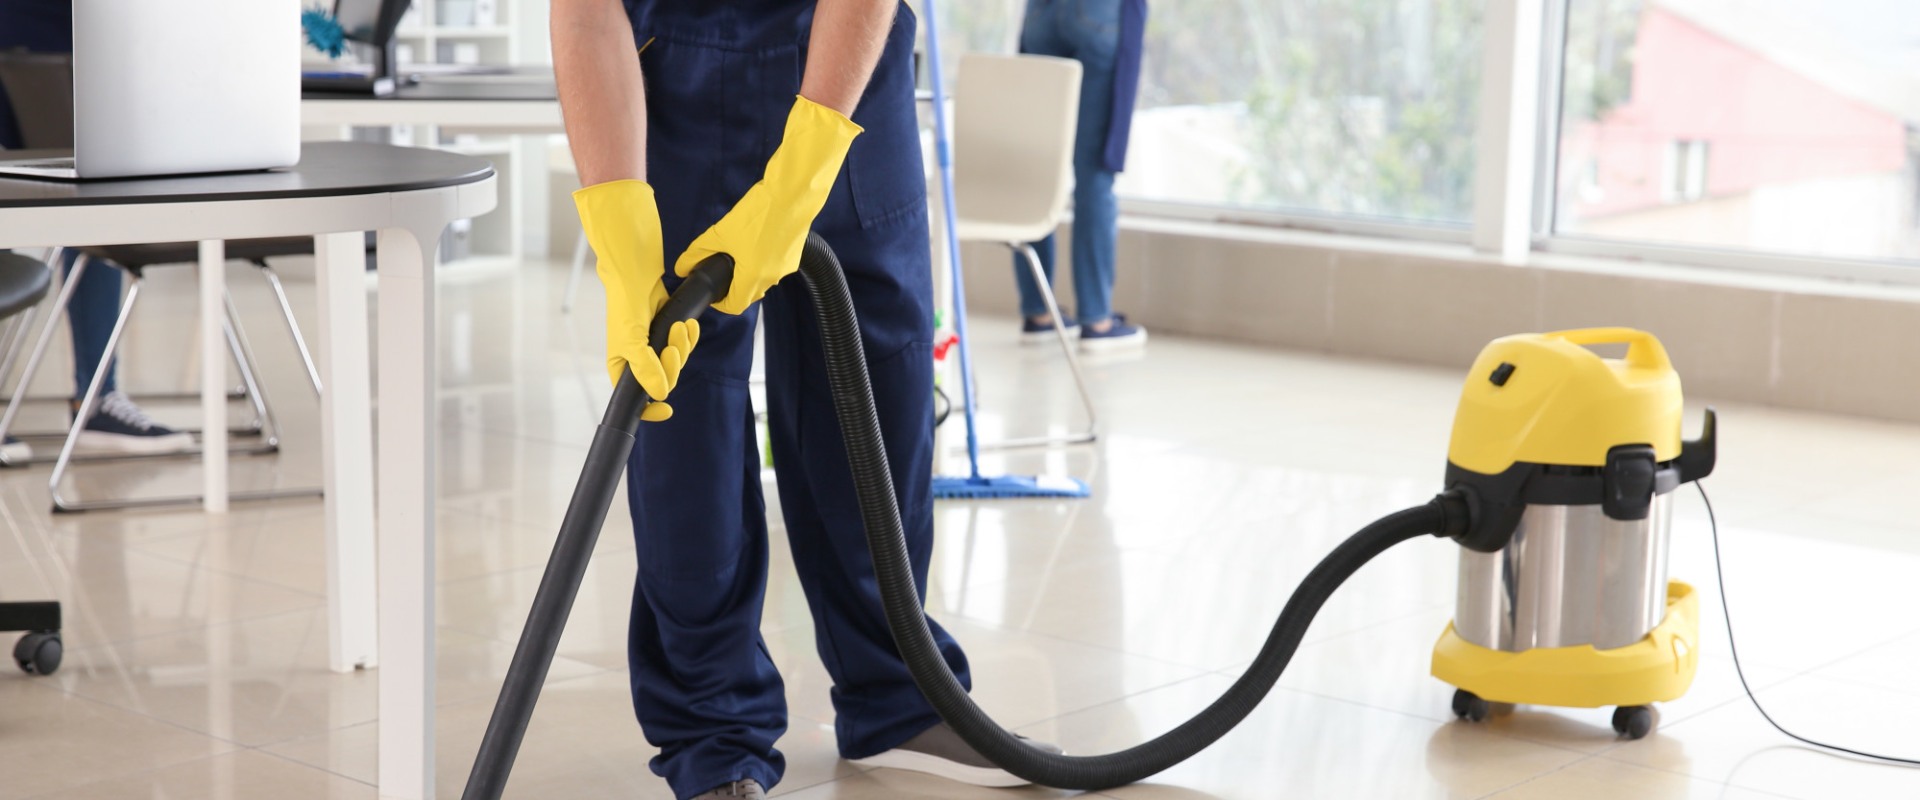 About commercial cleaning?